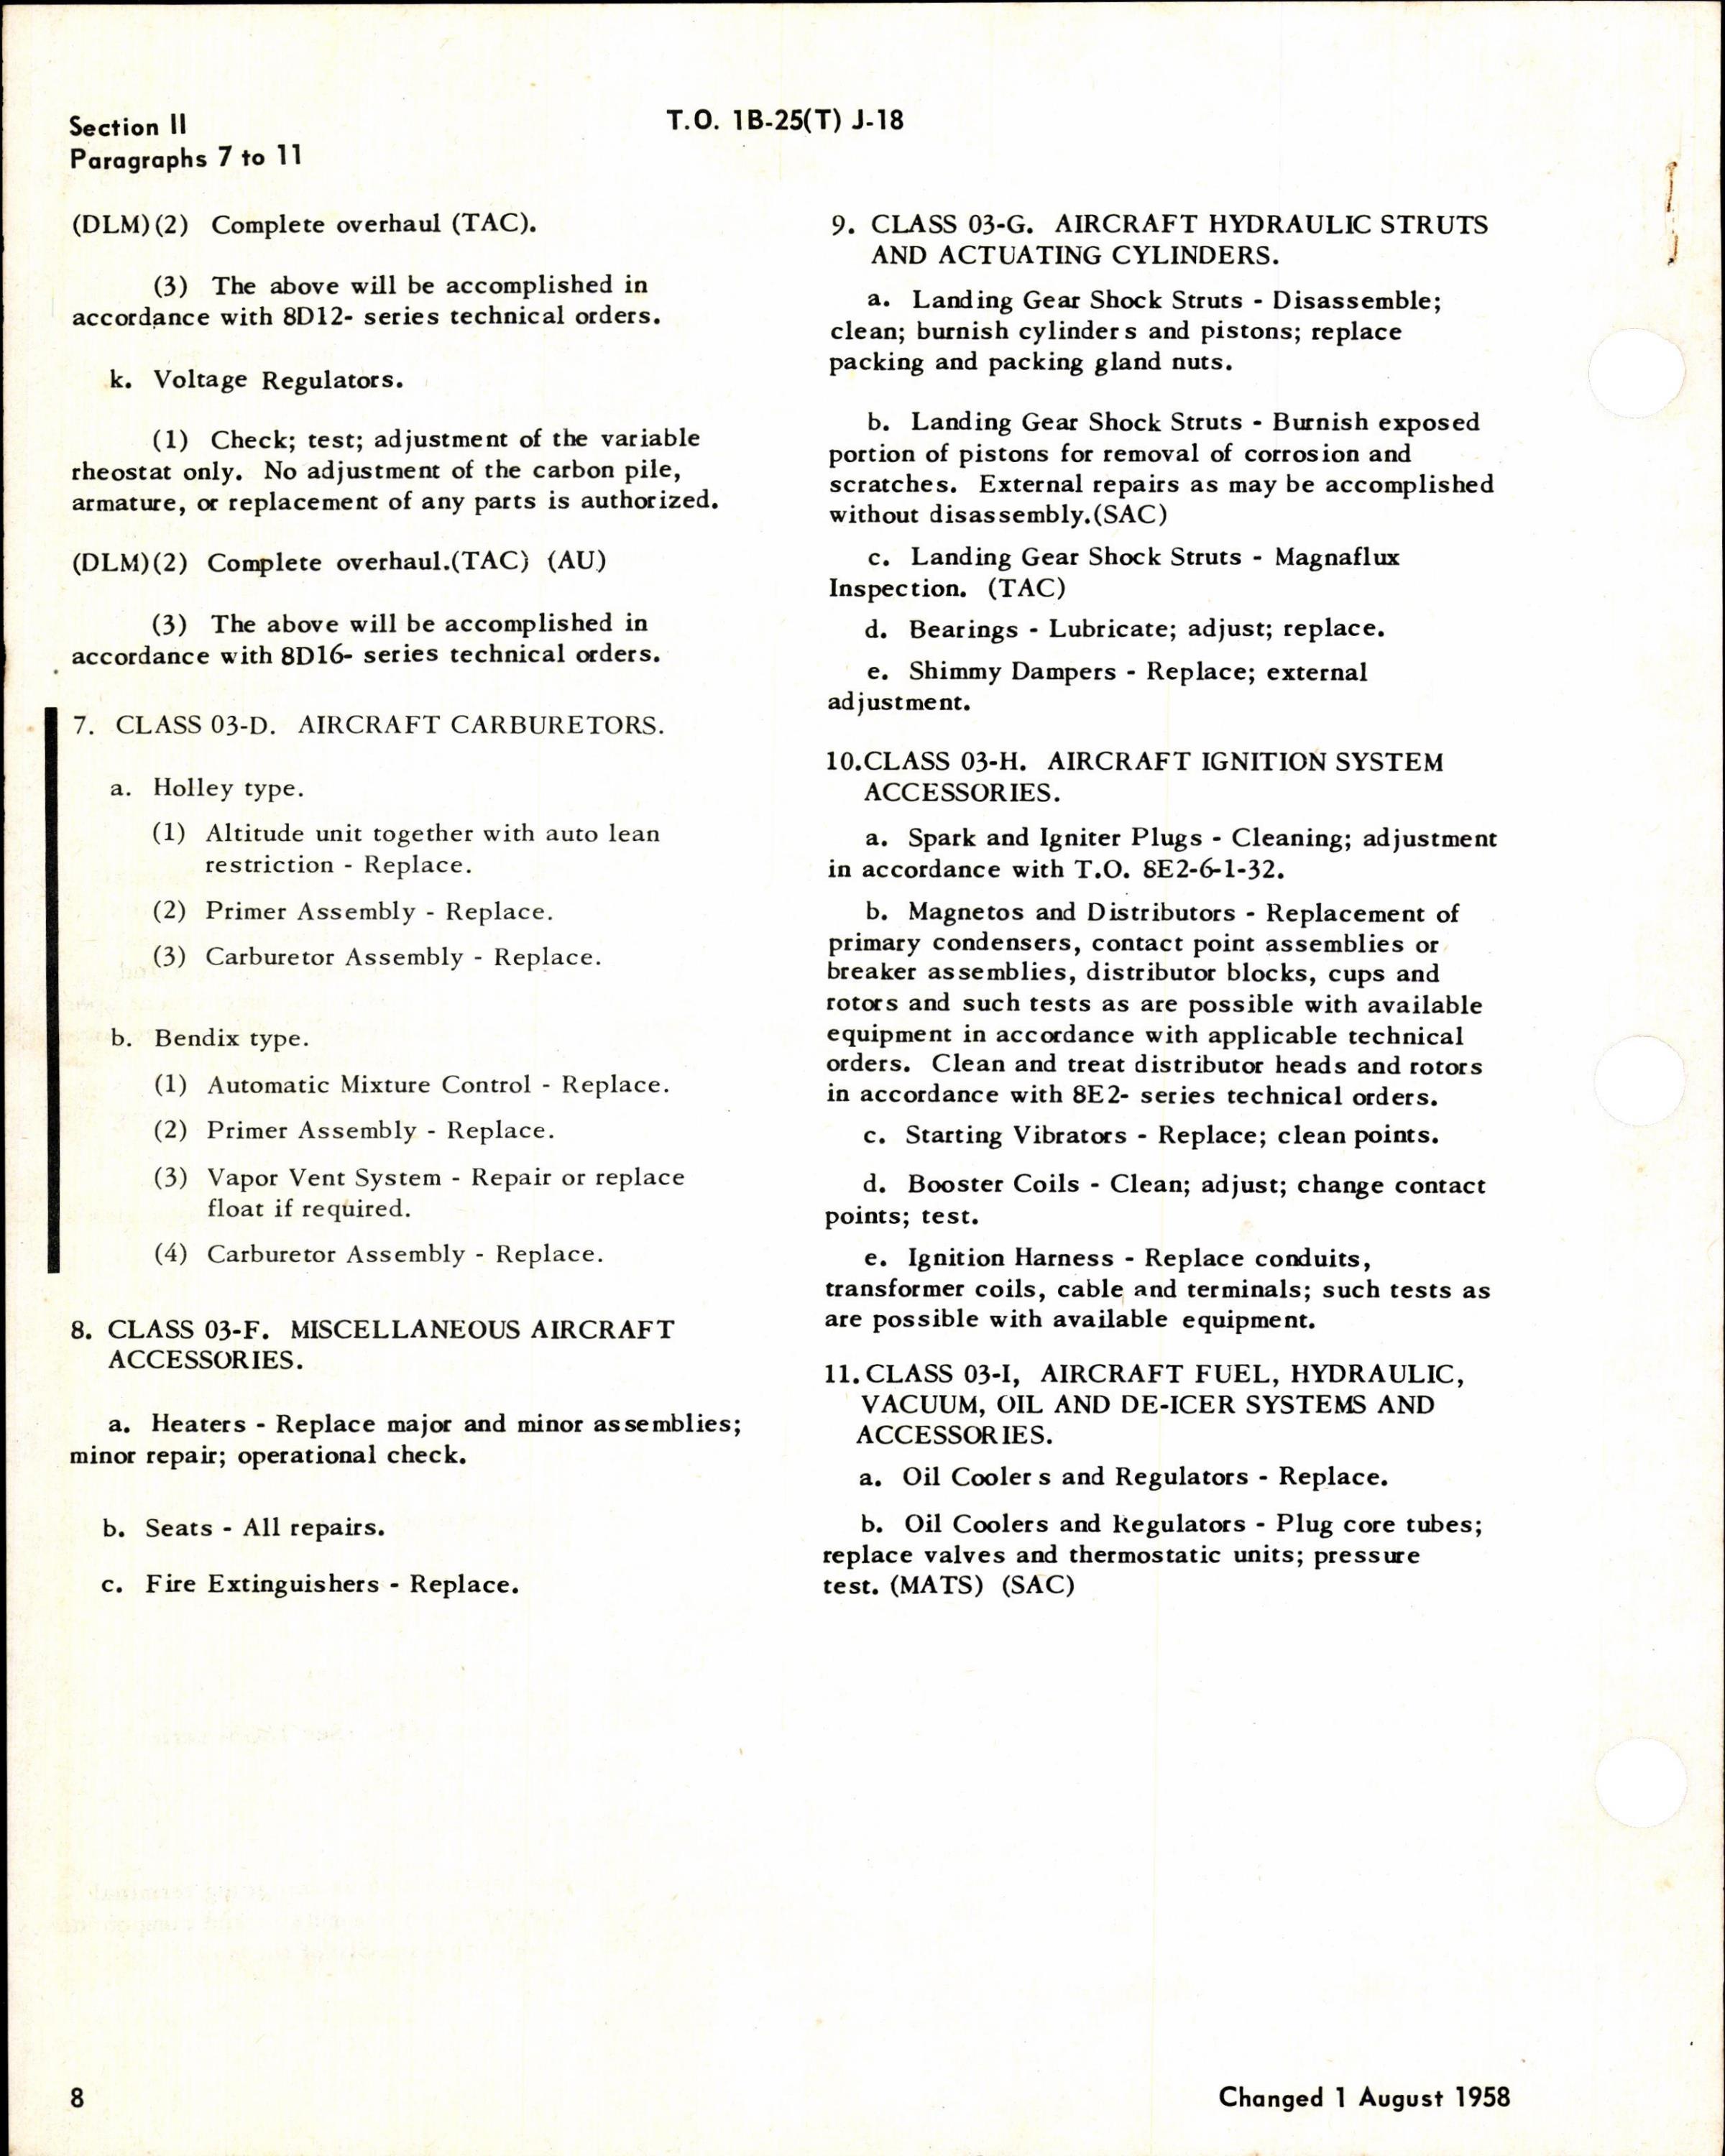 Sample page 4 from AirCorps Library document: Field Maintenance Airborne Material for USAF Series B-25J